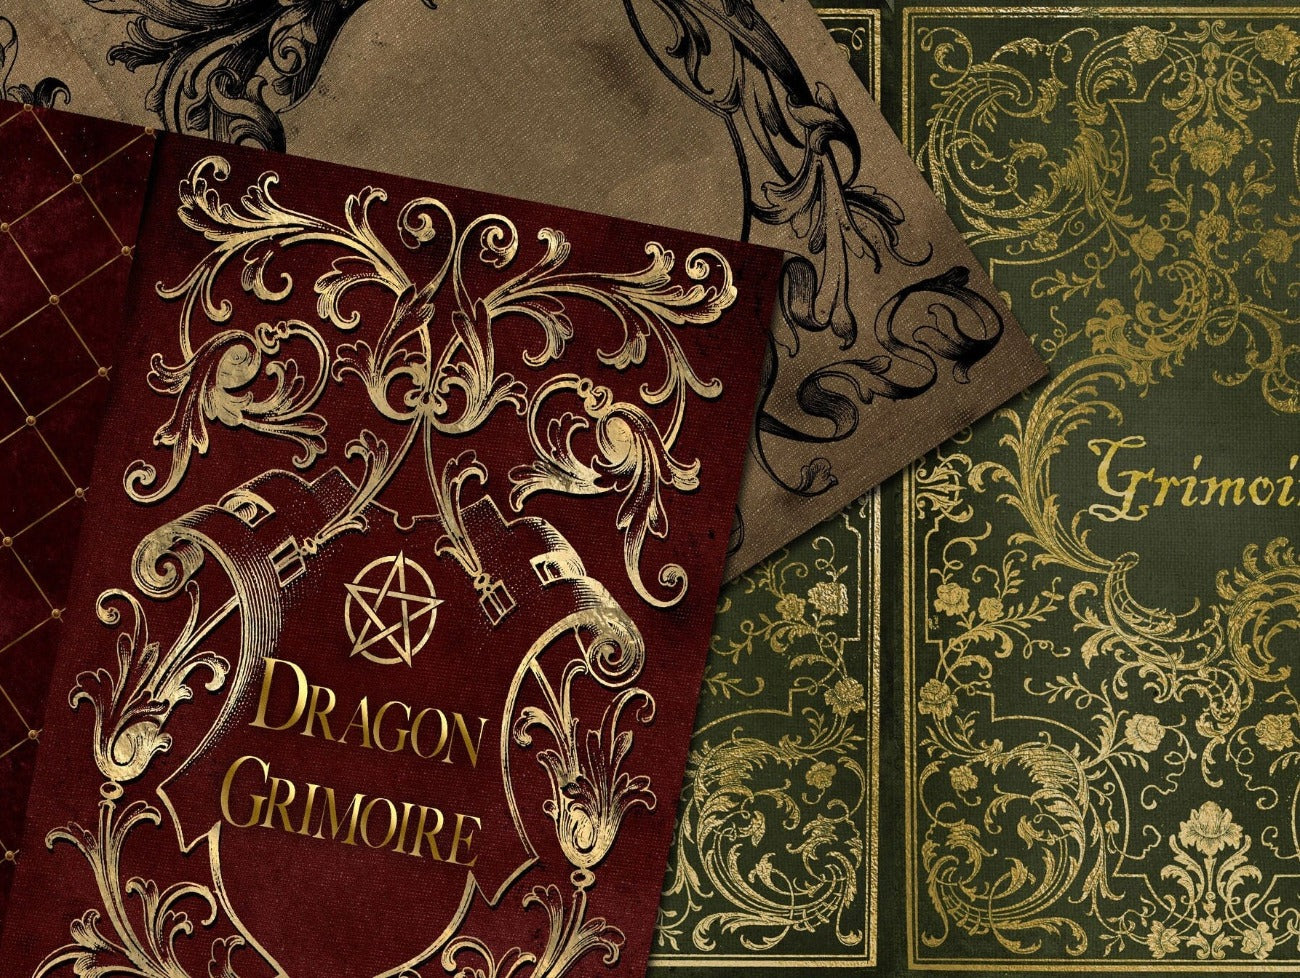 DRAGON GRIMOIRE, Printable Digital Junk Journal Kit for your Book of Shadows or Spellbook, Mystical World, Fire-Breathers, Fantasy Realm - Morgana Magick Spell